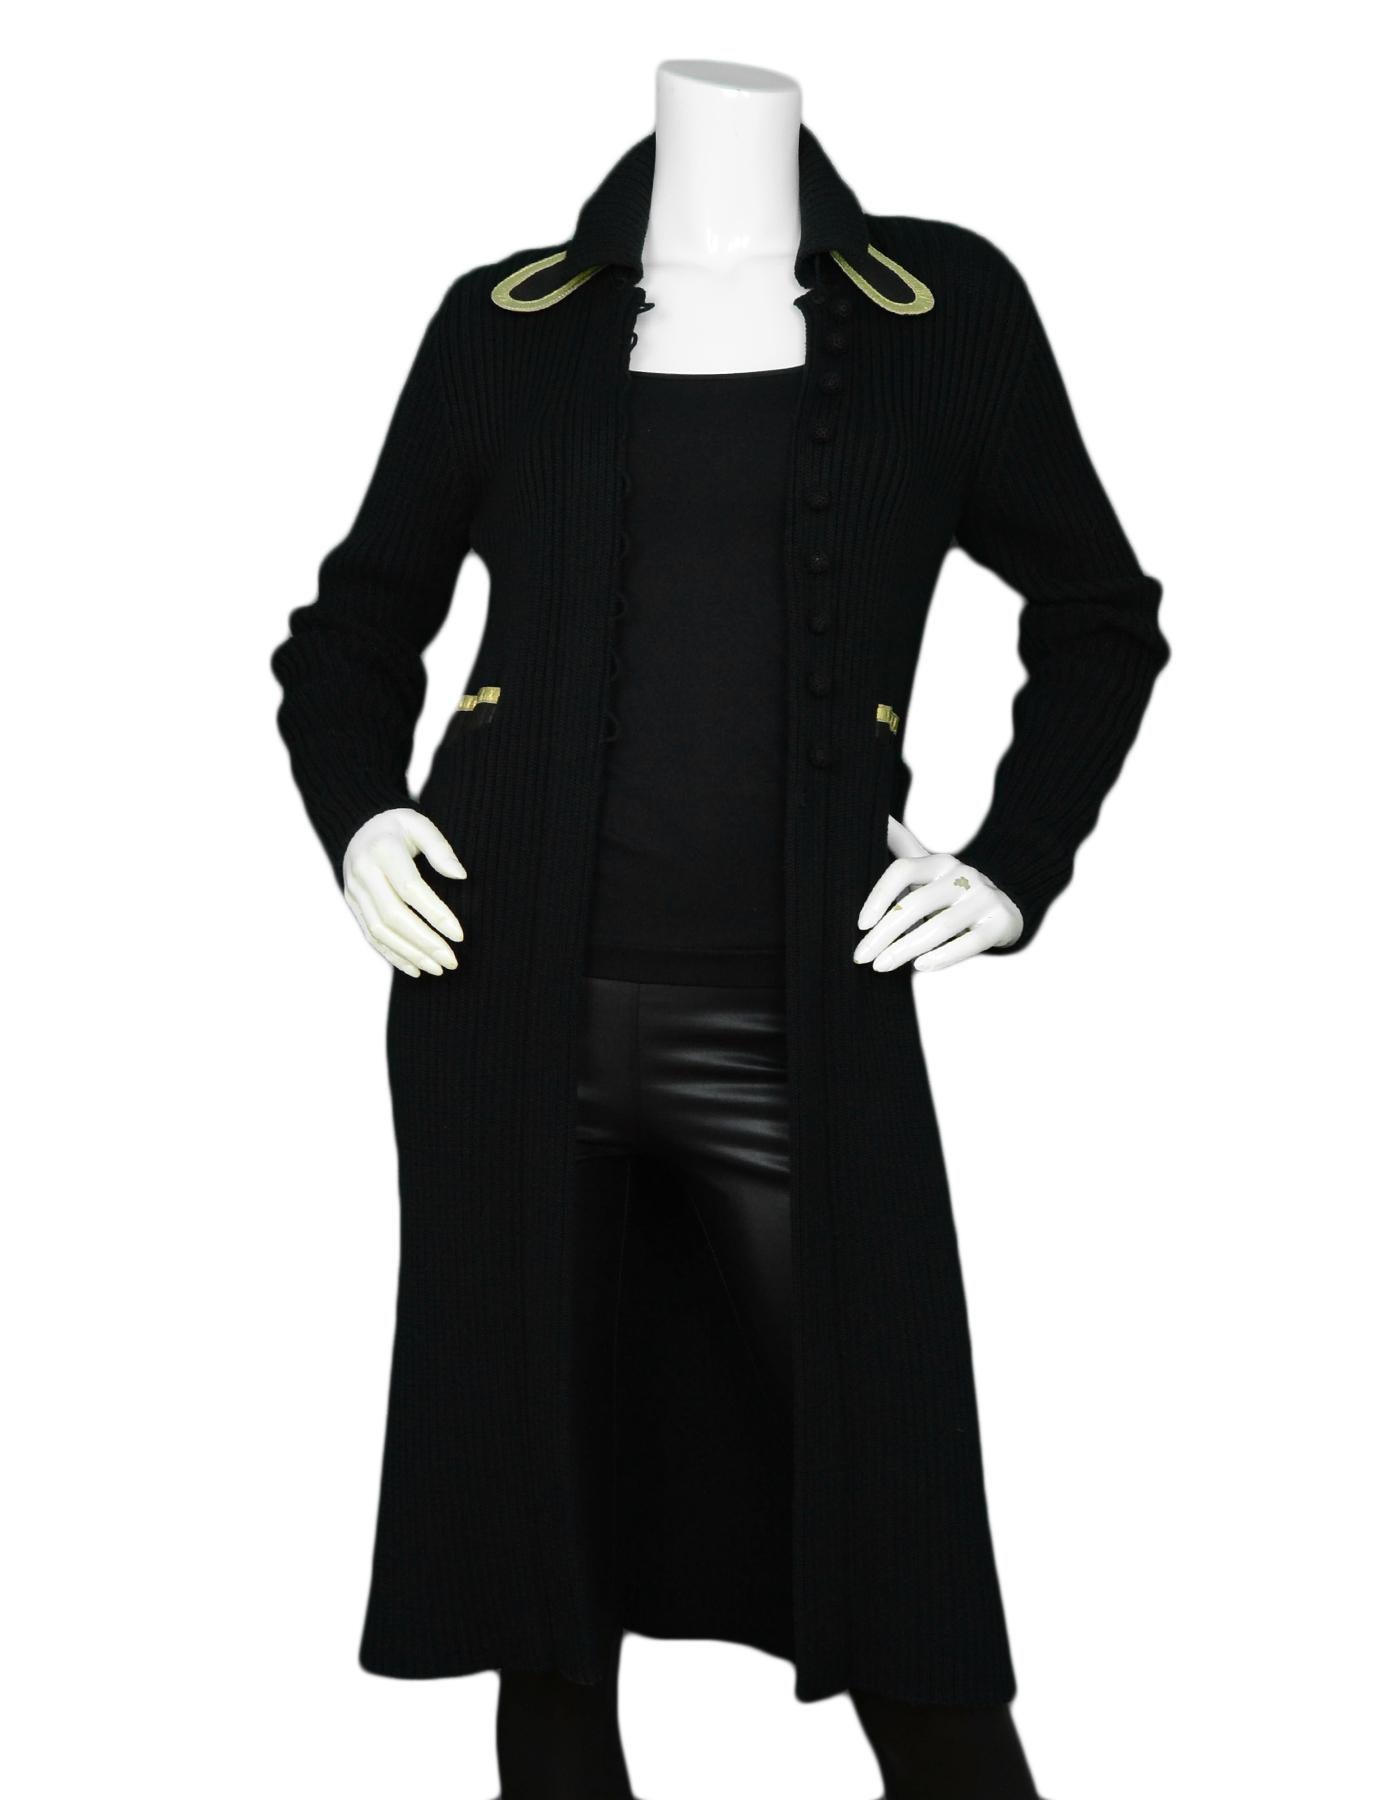 Prada Black Knit Long Cardigan Sweater w/ Black/Gold & Leather Collar/Pockets sz 38

Made In: Italy
Color: Black
Materials: Believed to be Cotton
Opening/Closure: Front button up
Overall Condition: Excellent pre-owned condition

Tag Size: IT38/ US2